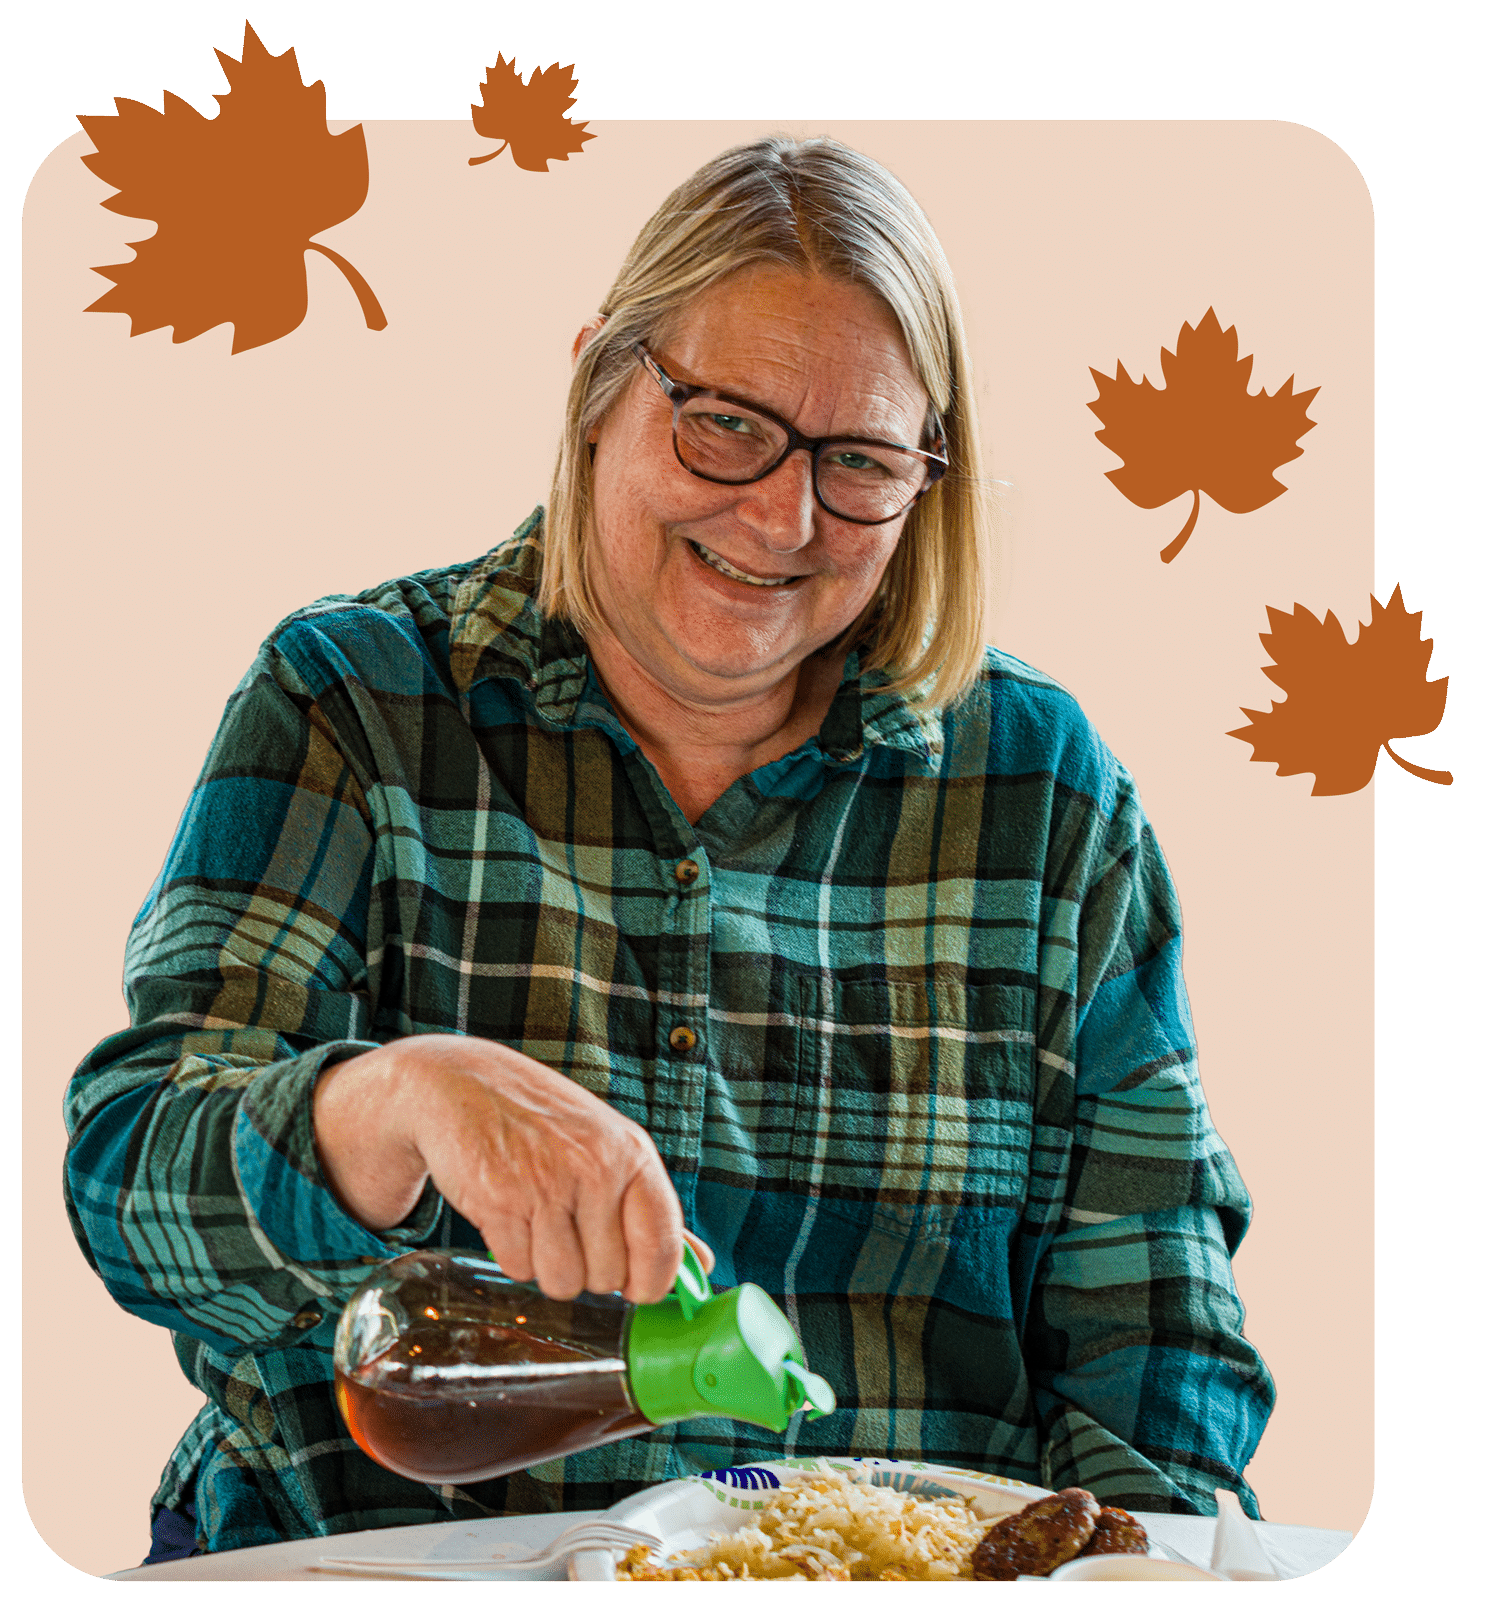 A woman wearing glasses pours maple syrup onto a plate